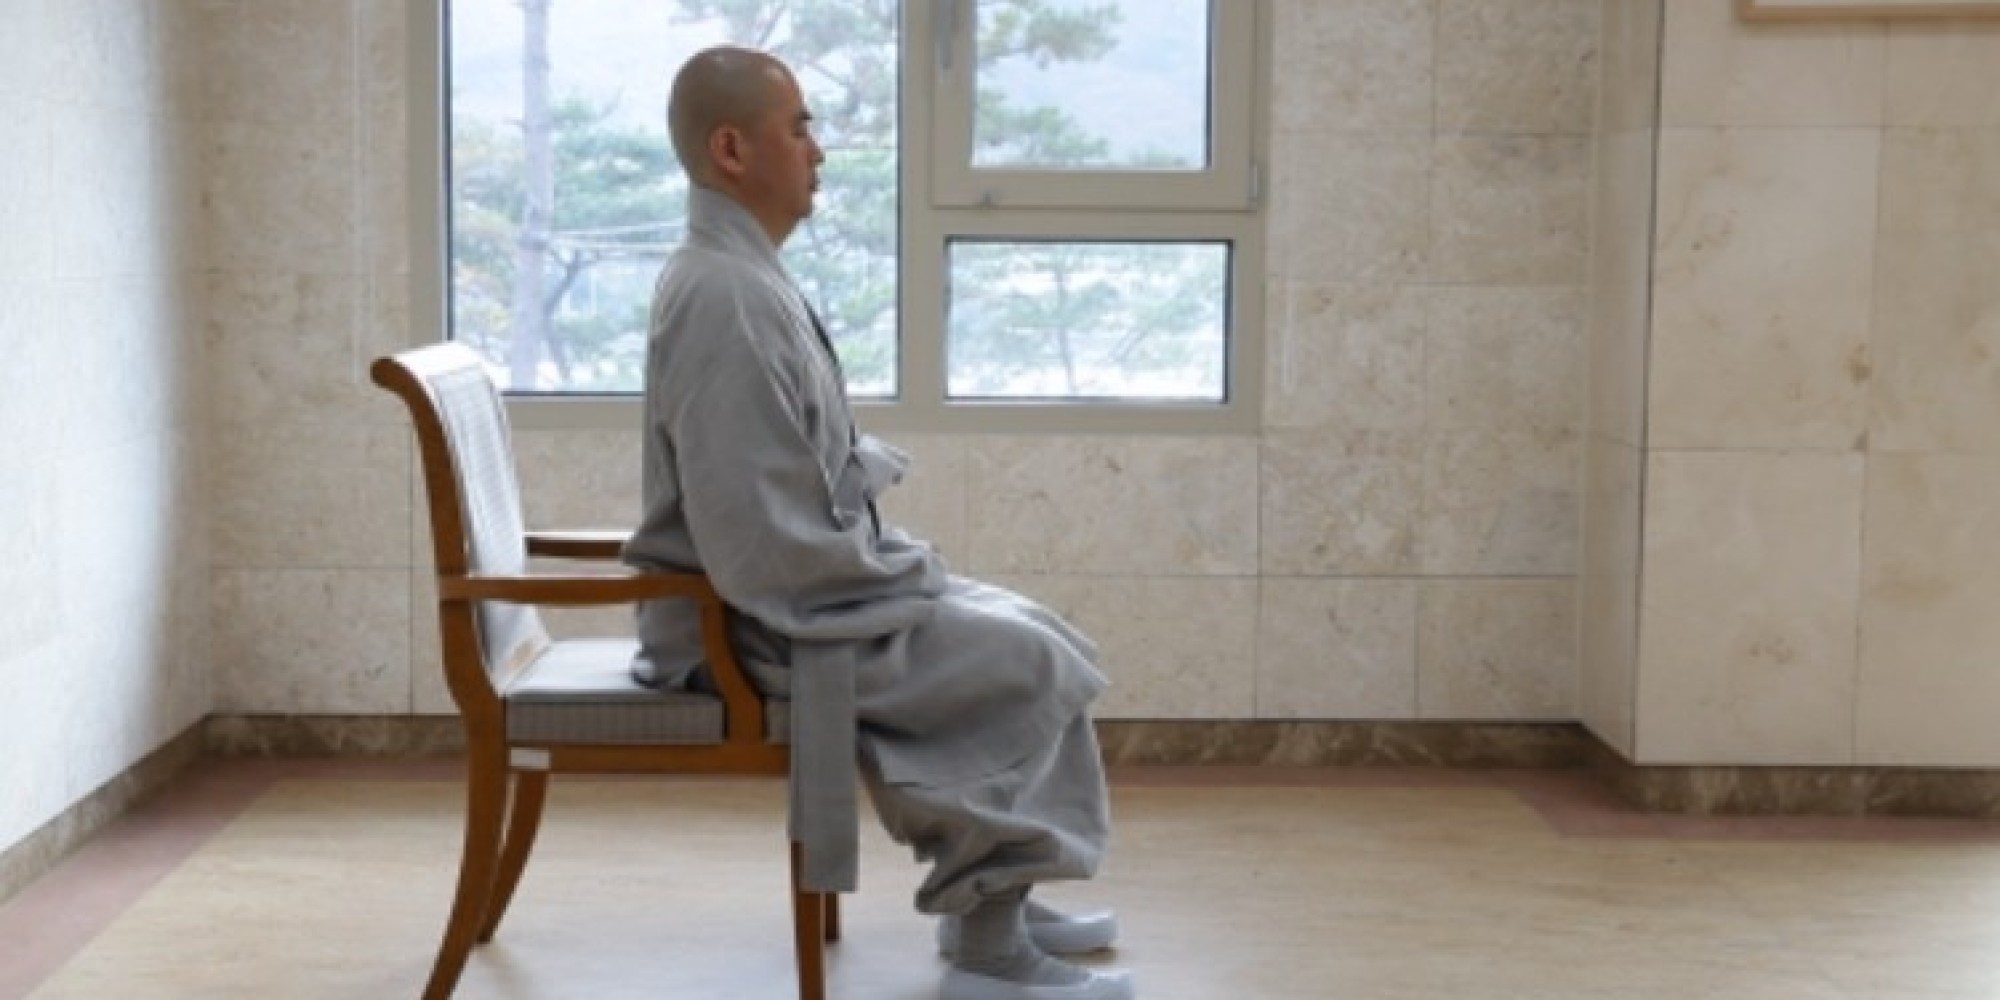 Meditate sitting on a chair